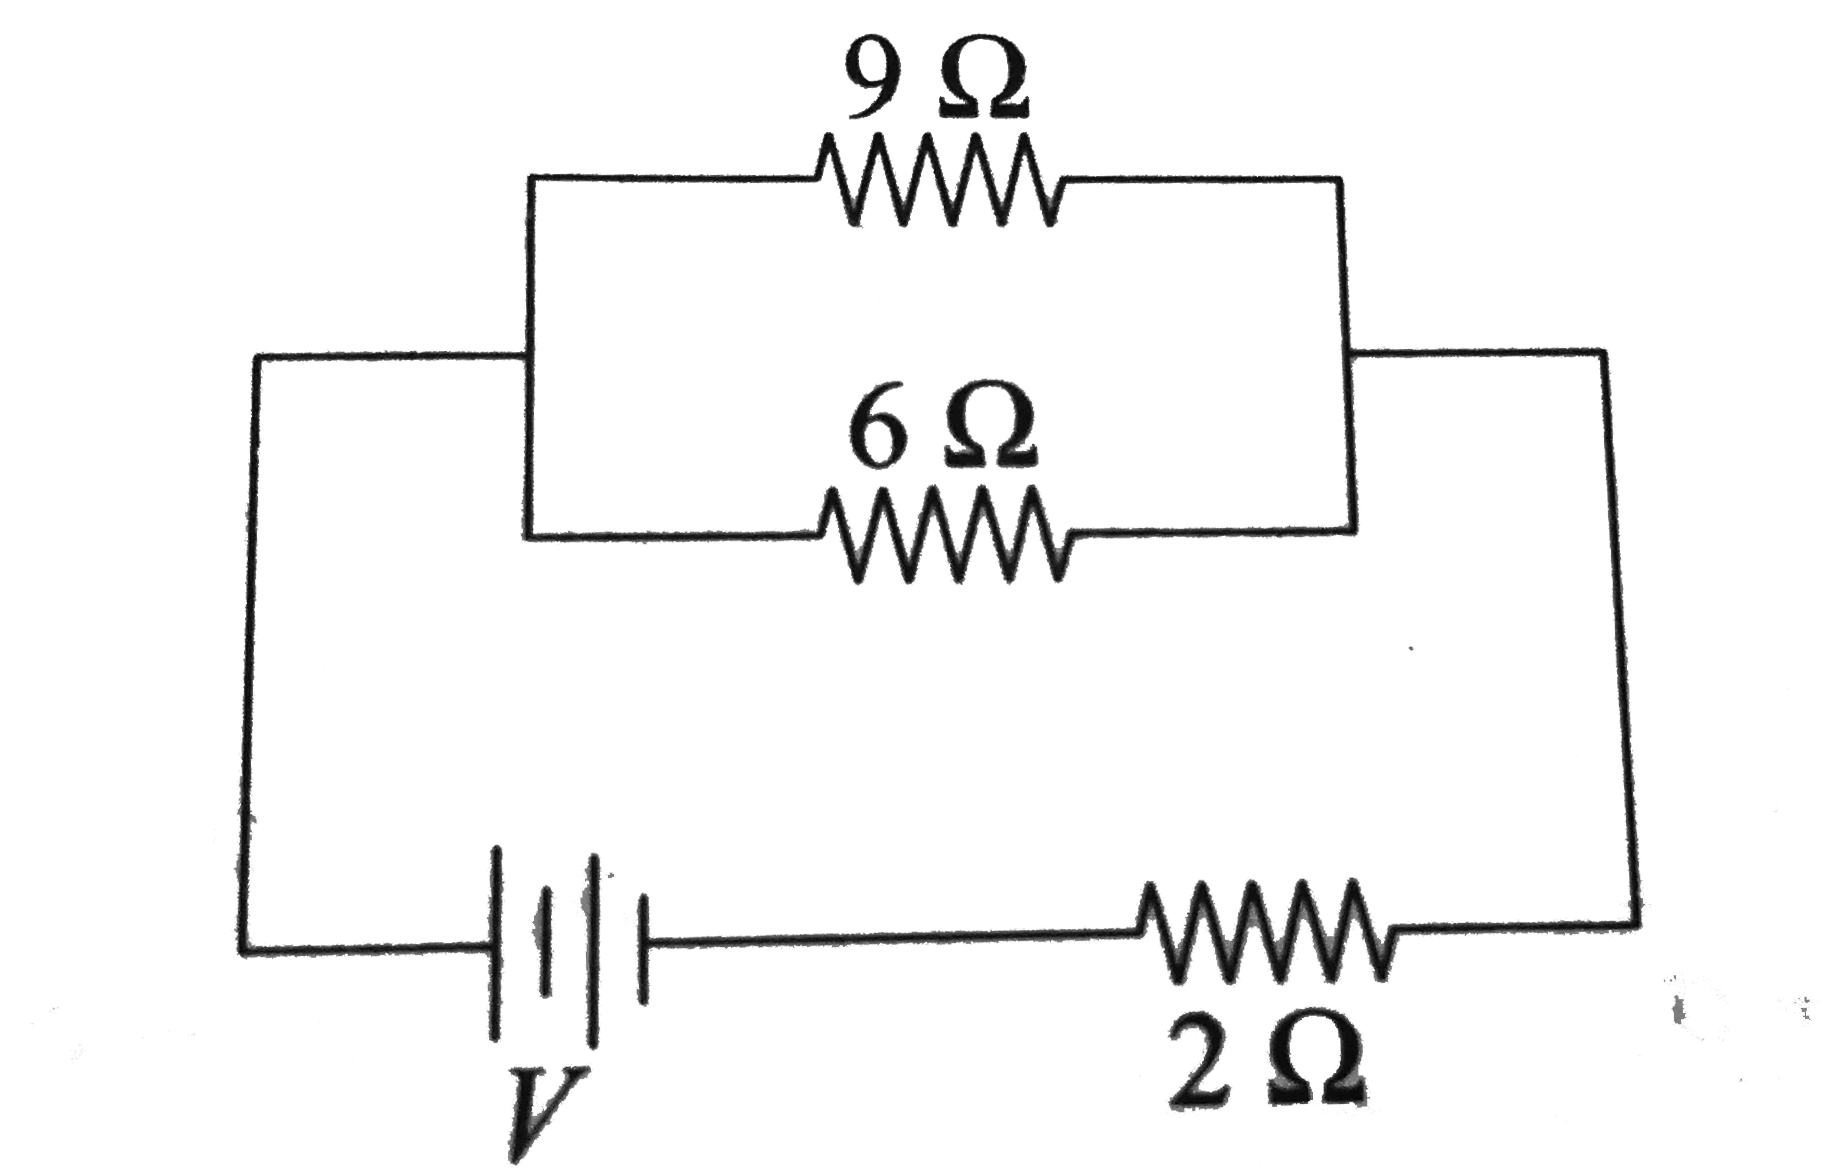 If power dissipated in the 9 Omega resistor in the resistor shown is 36 W, the potential difference across the 2 Omega resistor is